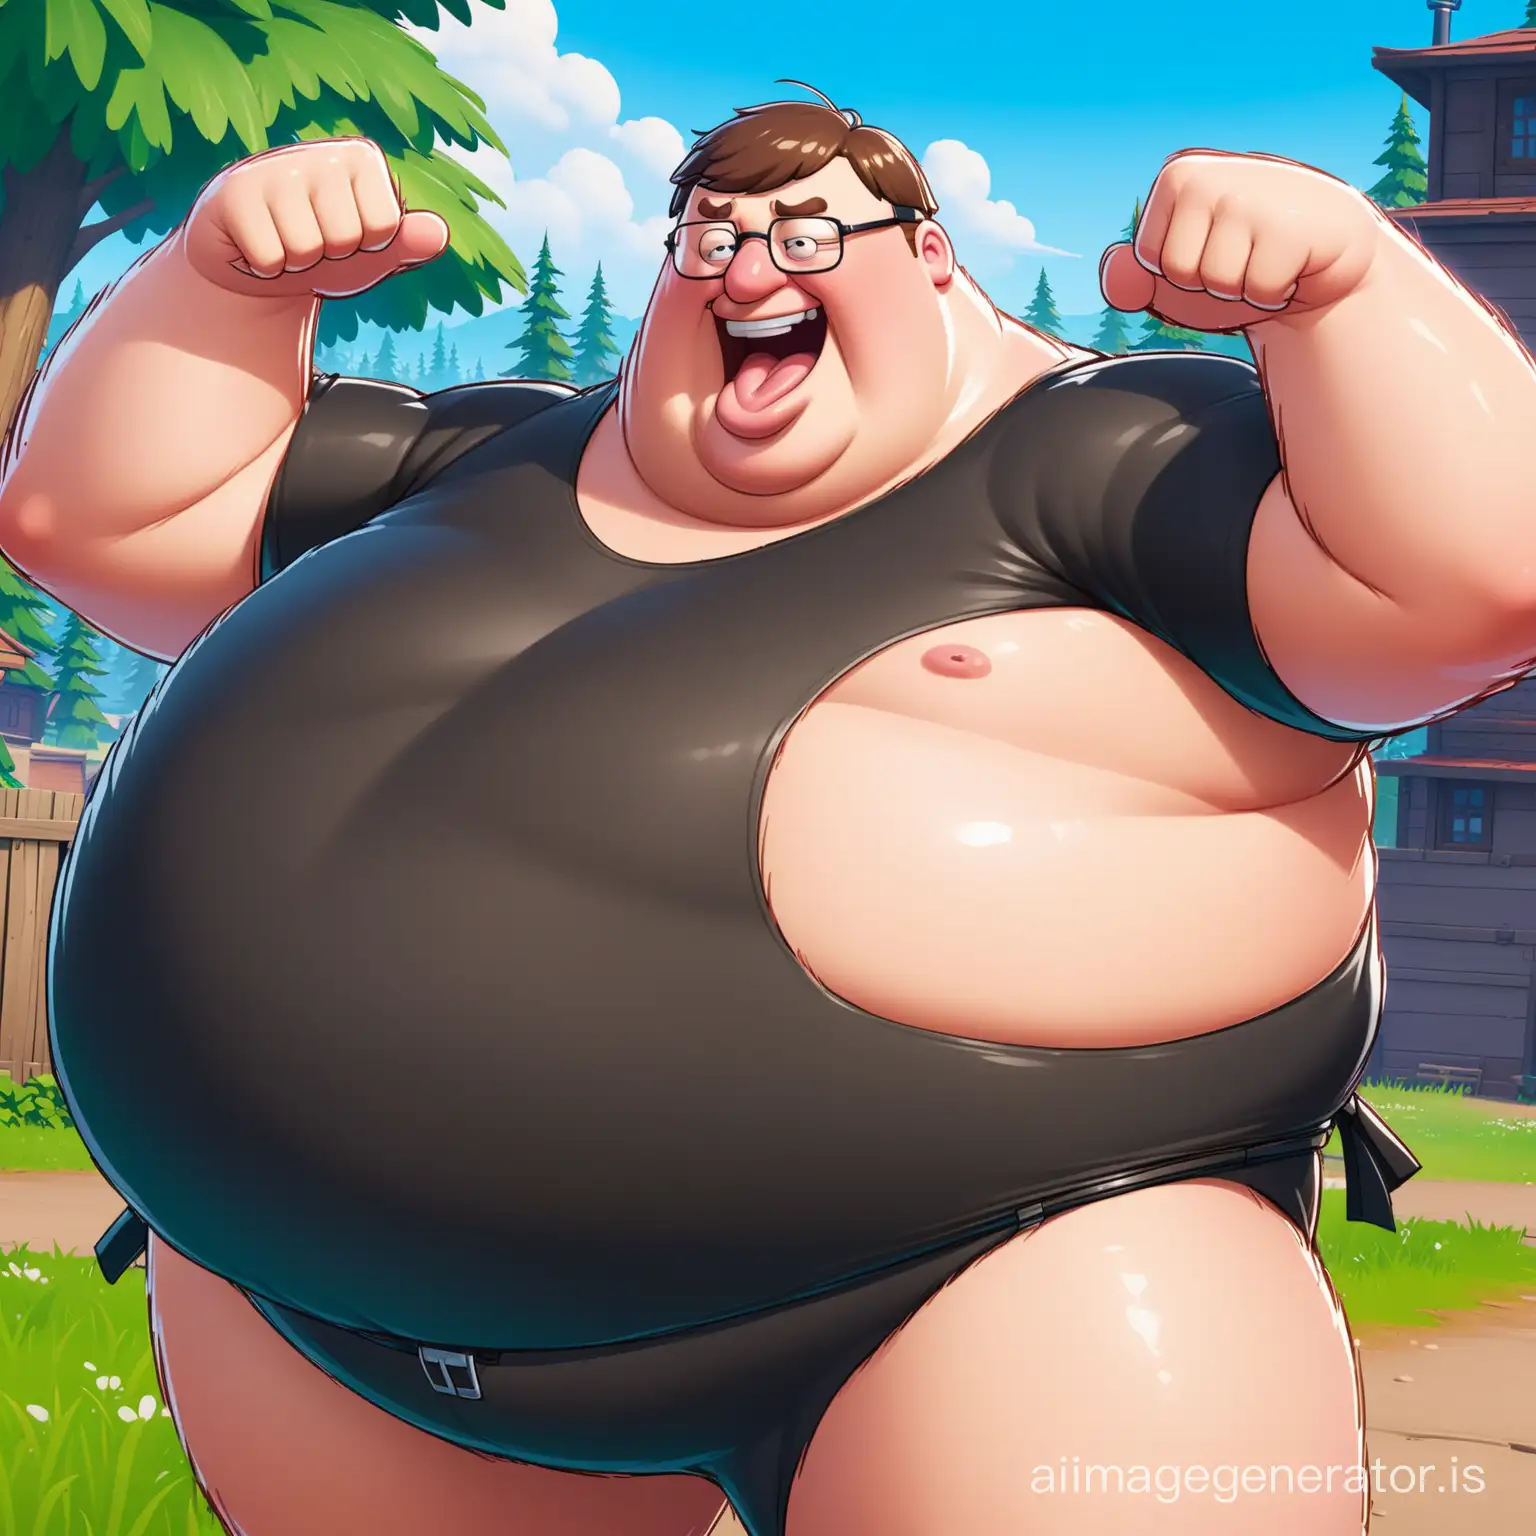 Peter-Griffin-Fortnite-Character-Animated-Crossover-Gaming-Experience